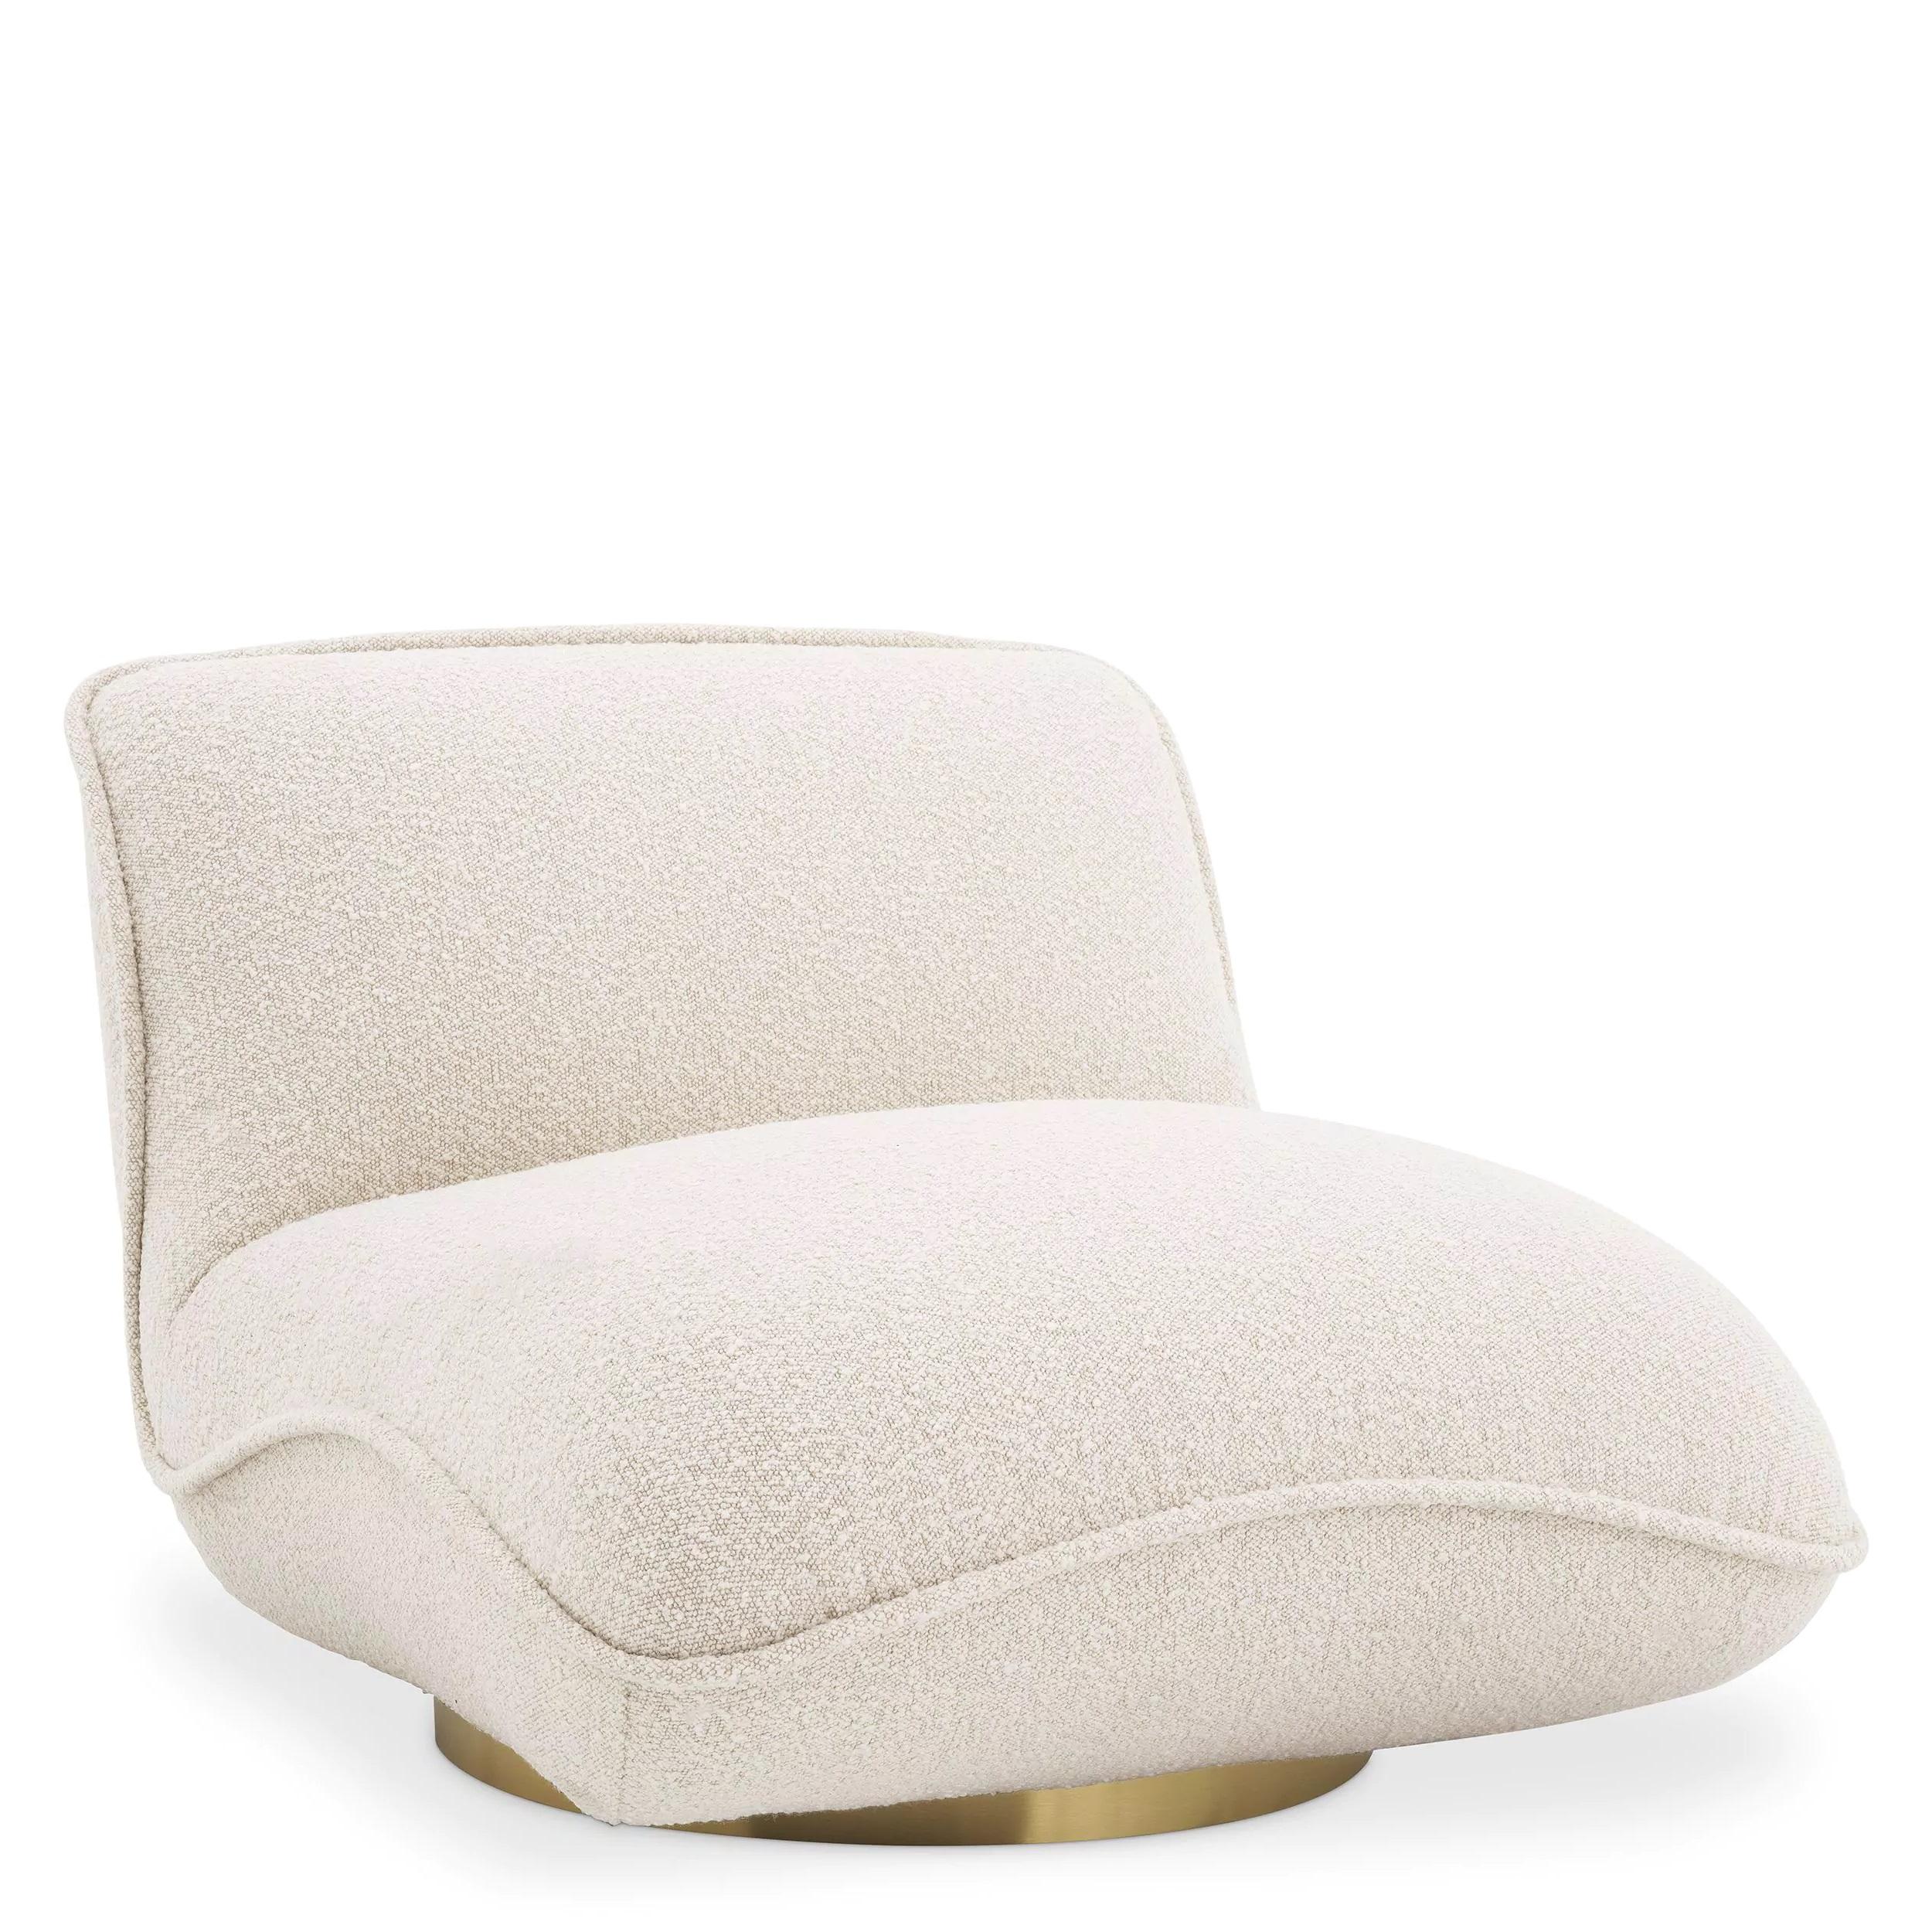 Welcoming swivel armchair in beige bouclé fabric with brass finishes.